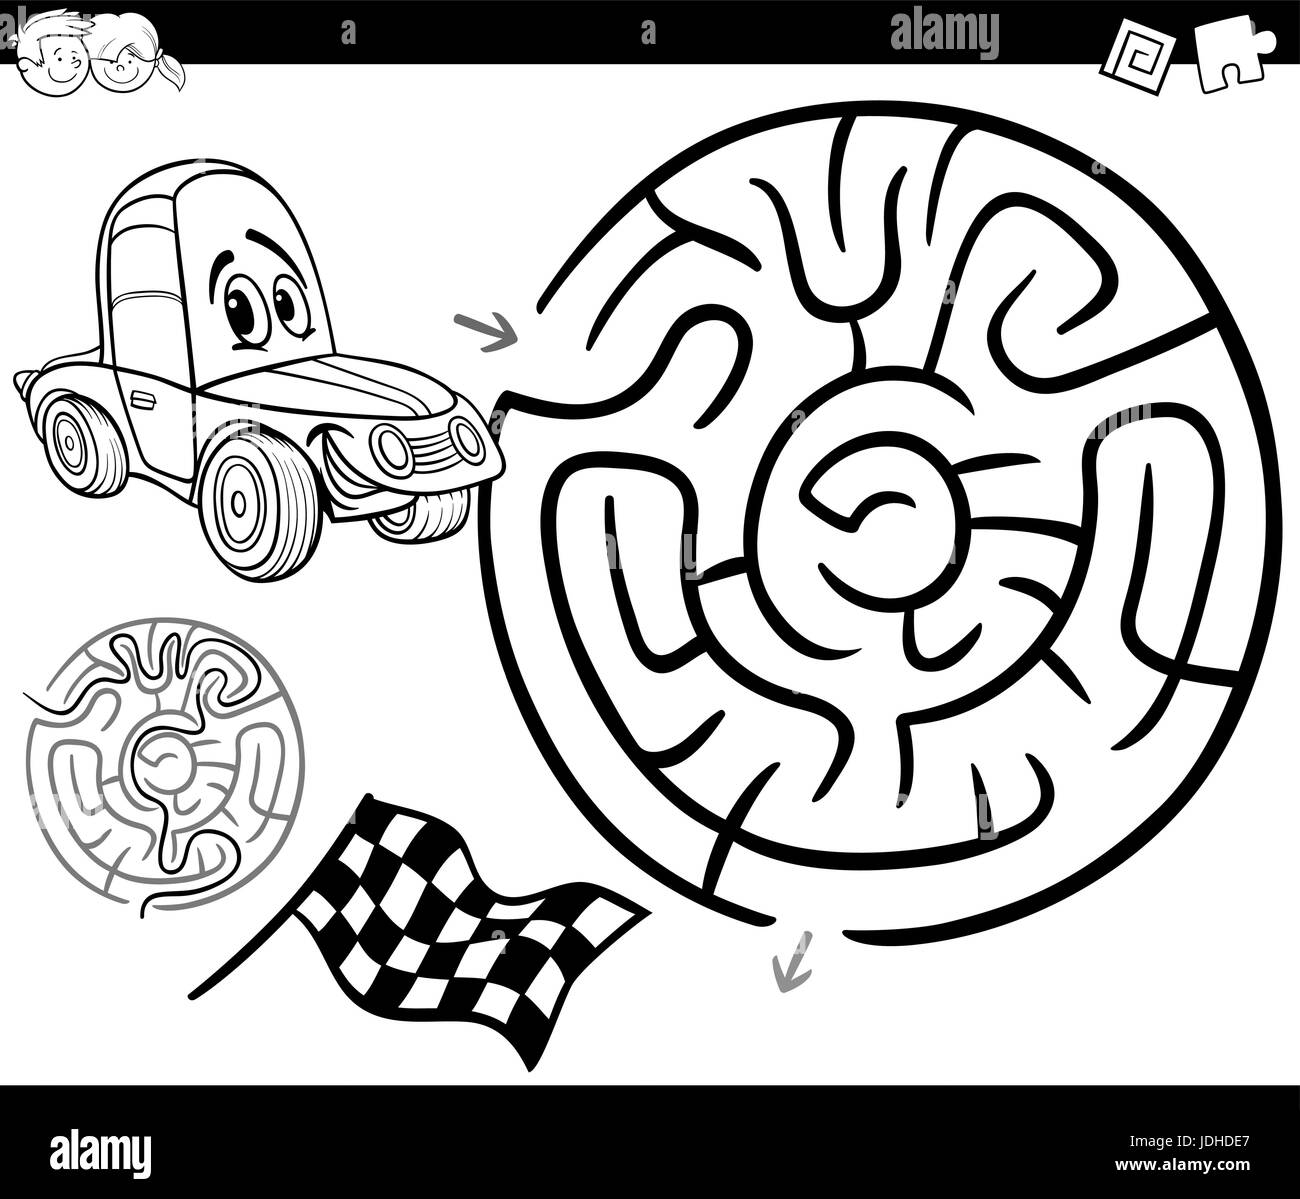 Black and White Cartoon Illustration of Education Maze or Labyrinth Game  for Children with Racing Car Coloring Page Stock Vector Image & Art - Alamy